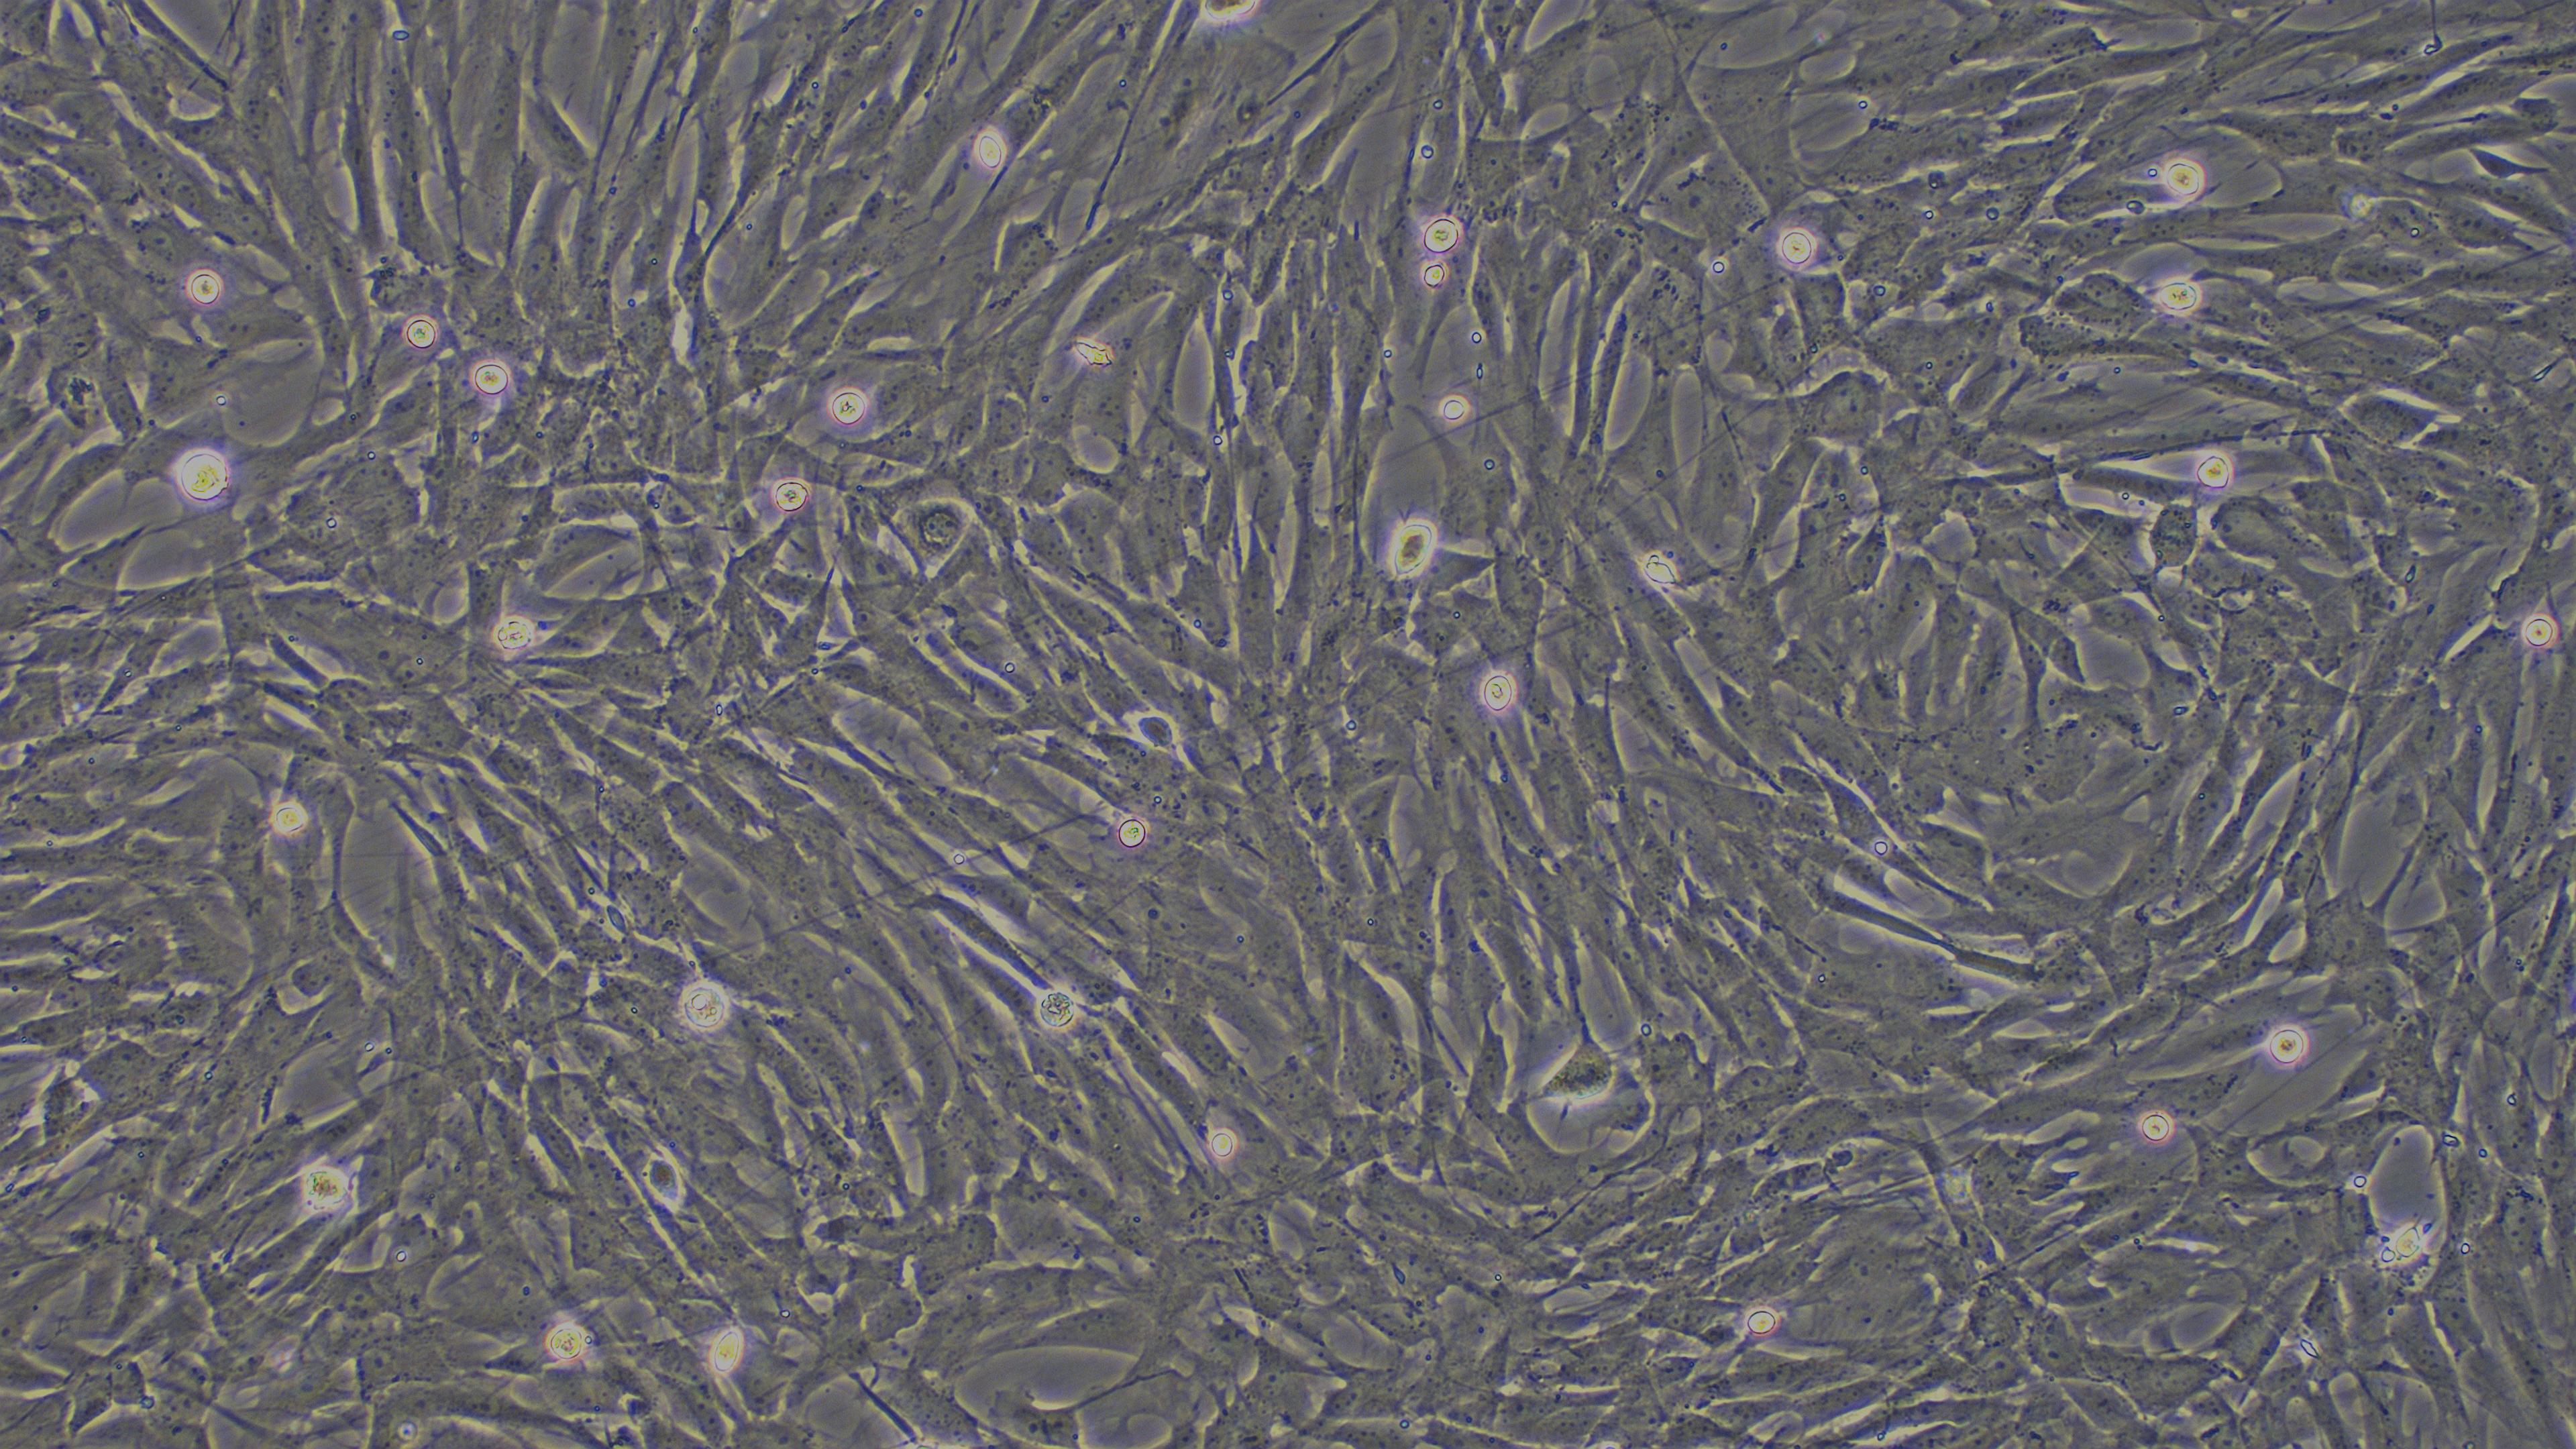 Primary Canine Corneal Epithelial Cells (CEC)